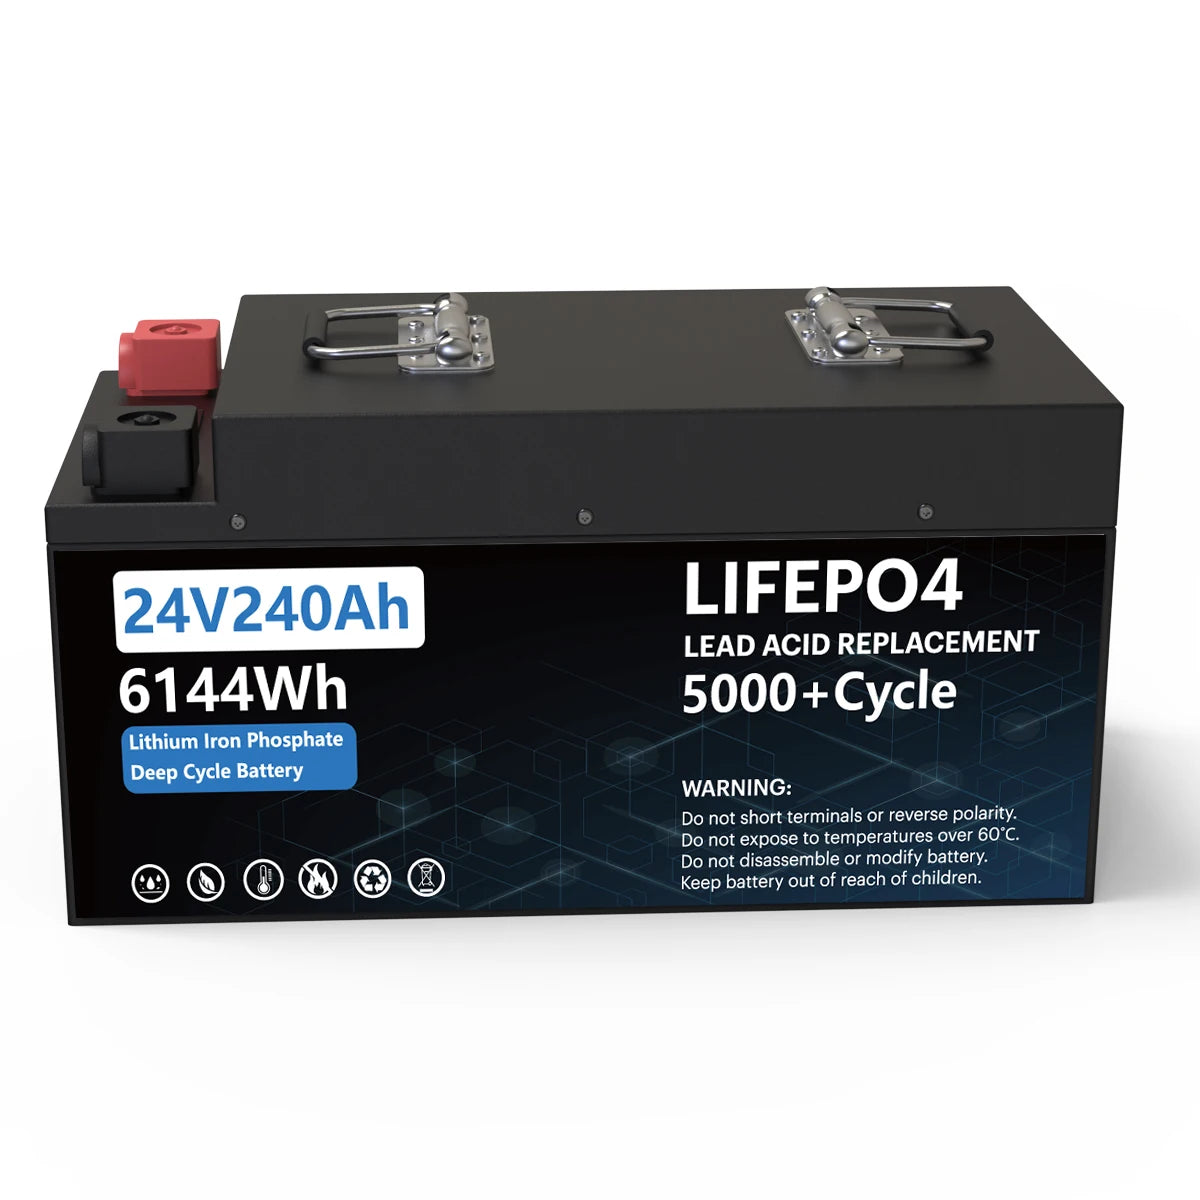 LiFePO4 24V 200AH Battery, Lithium iron phosphate deep cycle battery with cautionary warnings on use.